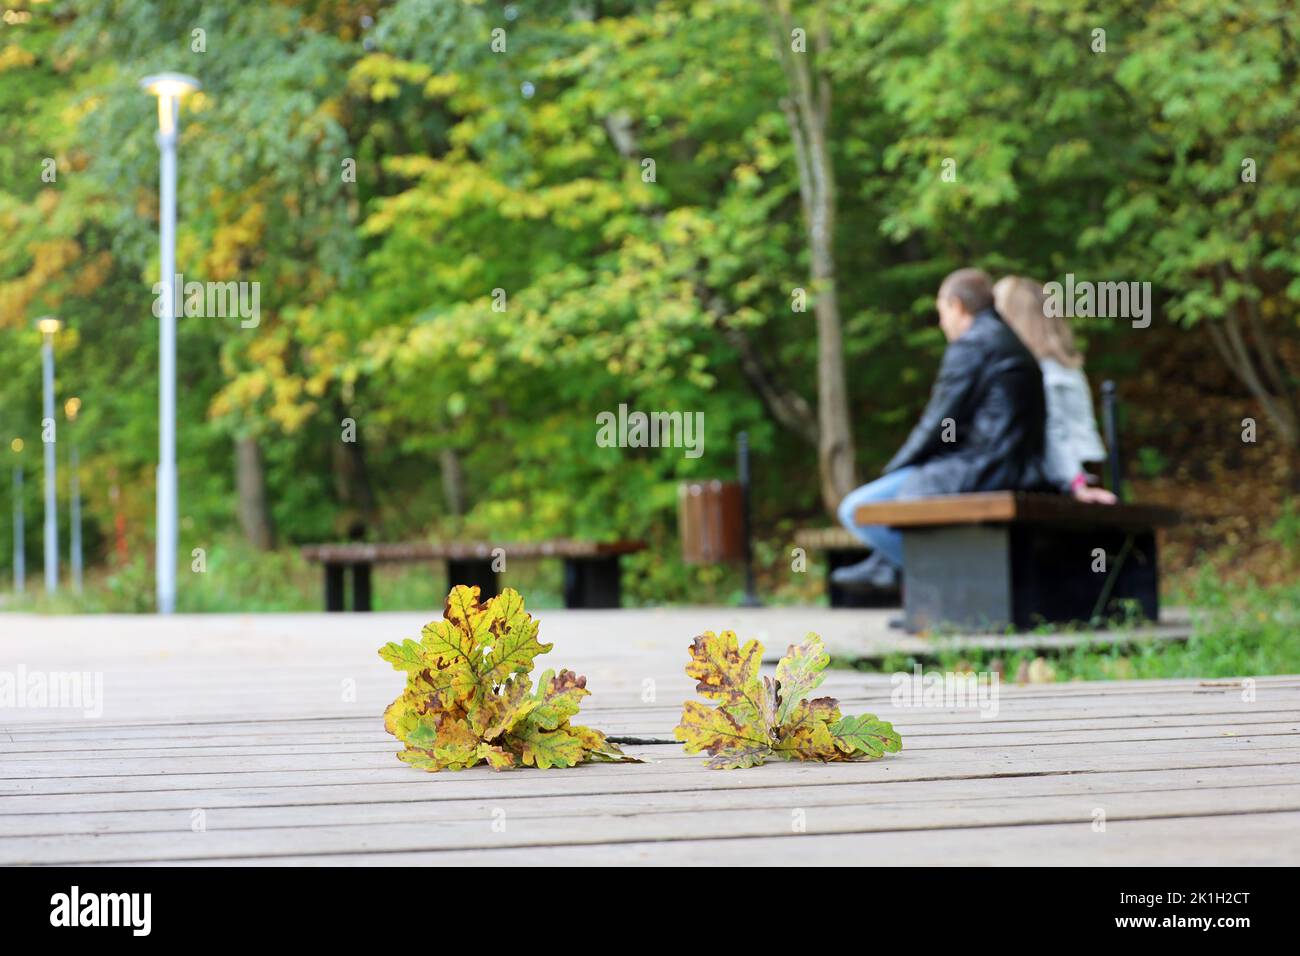 Autumn season, fallen oak leaves on wooden path, defocused view to couple sitting on a bench in city park Stock Photo